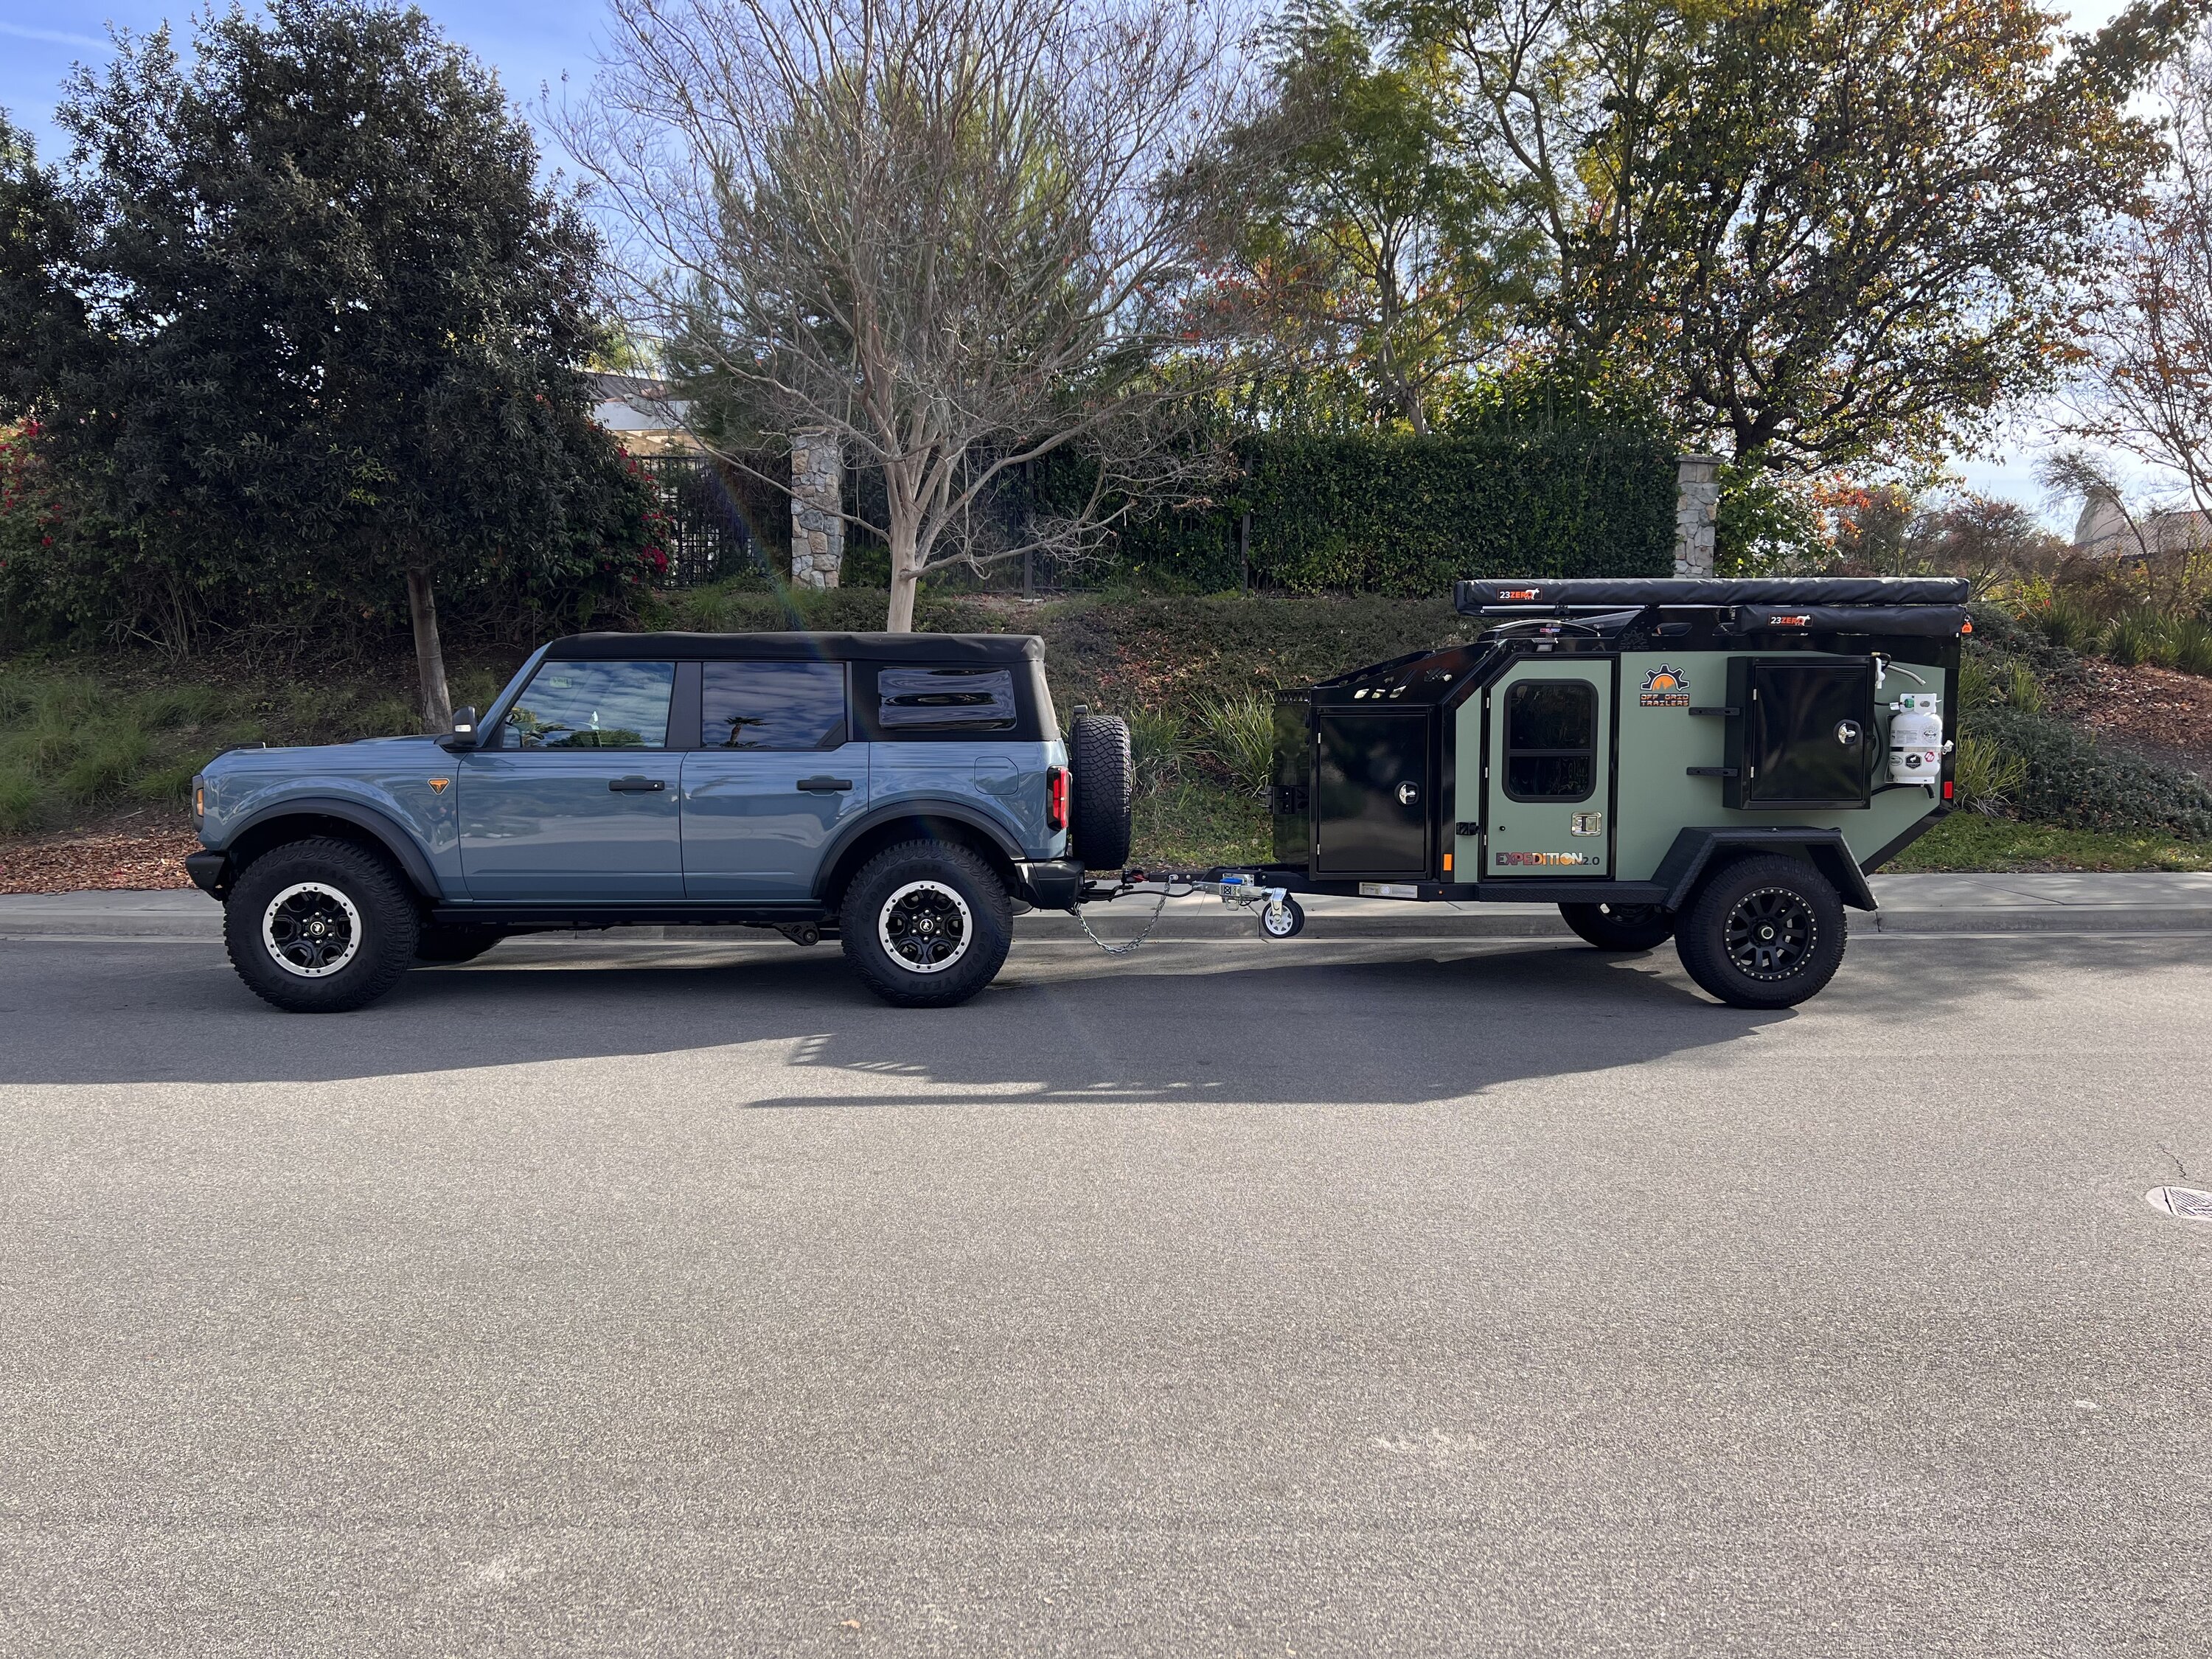 Ford Bronco Raptor for Overlanding and Towing Camper Trailer? IMG_1312